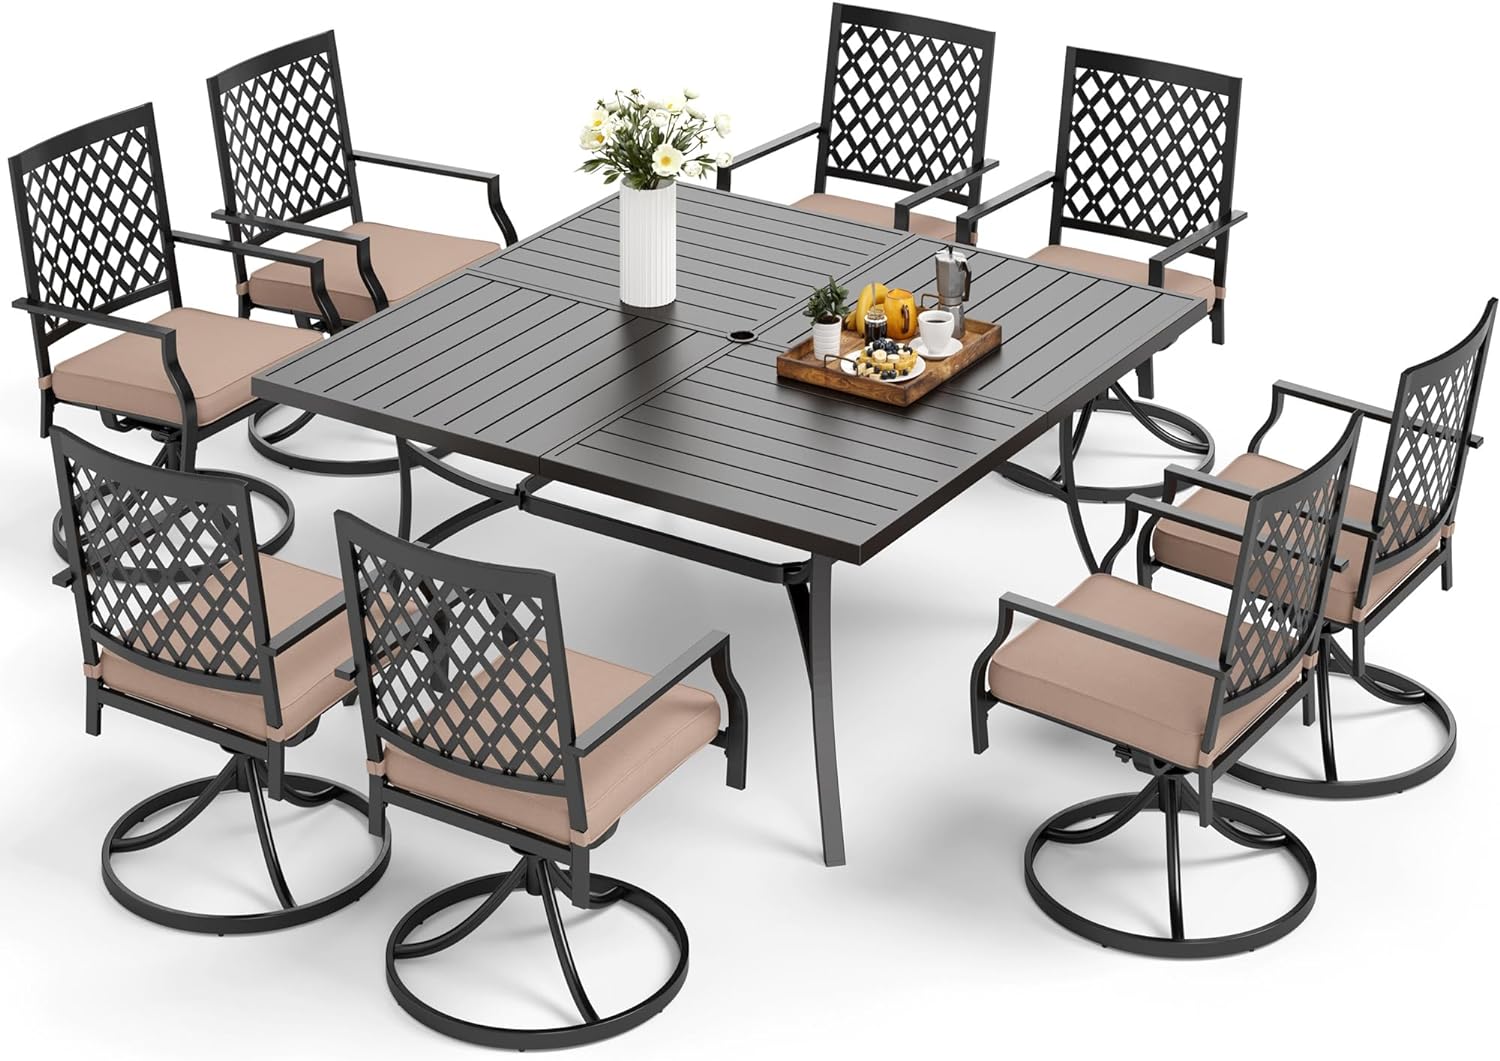 MFSTUDIO 9 PCS Patio Dining Set with Large Square Metal Slat Dining Table and 8 Swivel Metal Chair with Cushion, All Weather Outdoor Furniture for Lawn Backyard Garden